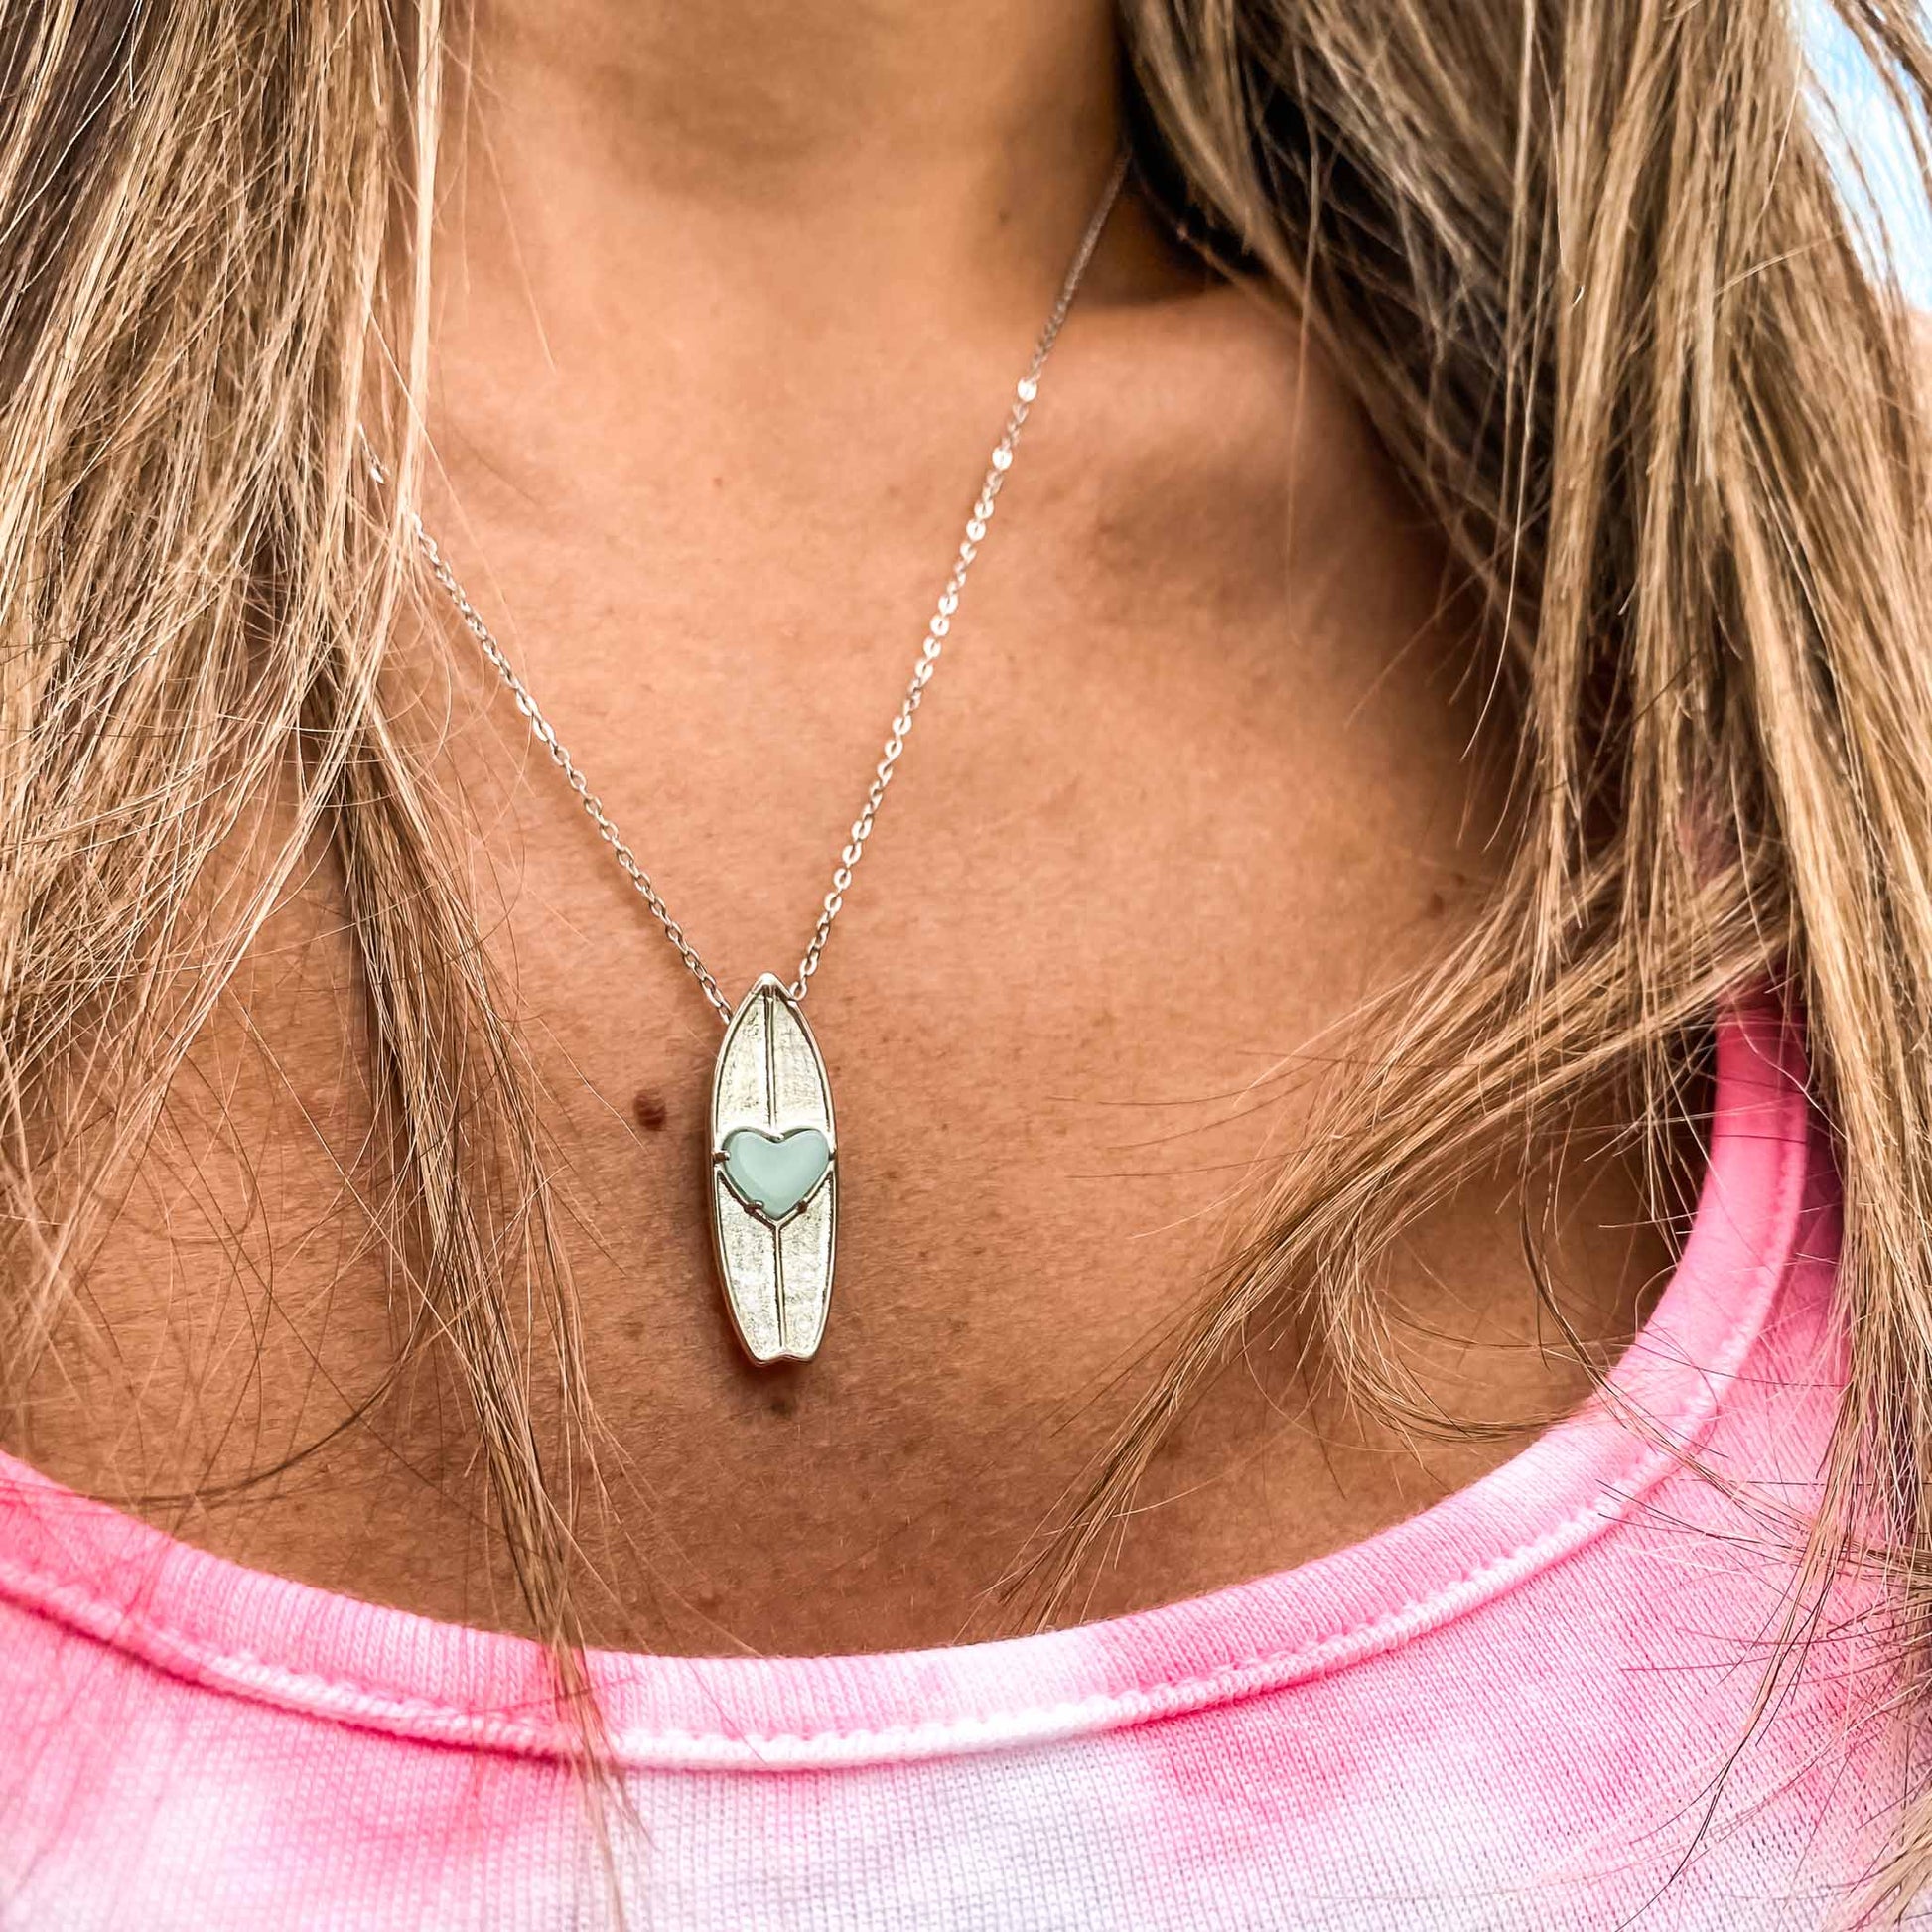 What's the surf forecast for today? While Surfline helps with the swell, wind & wave forecasts we help you show off your passion for surfing. Whether you're surfing or just checking the waves at Pipeline, take your surfboard, always. Shop the March birthstone surf jewelry online or at a surf shop near you.